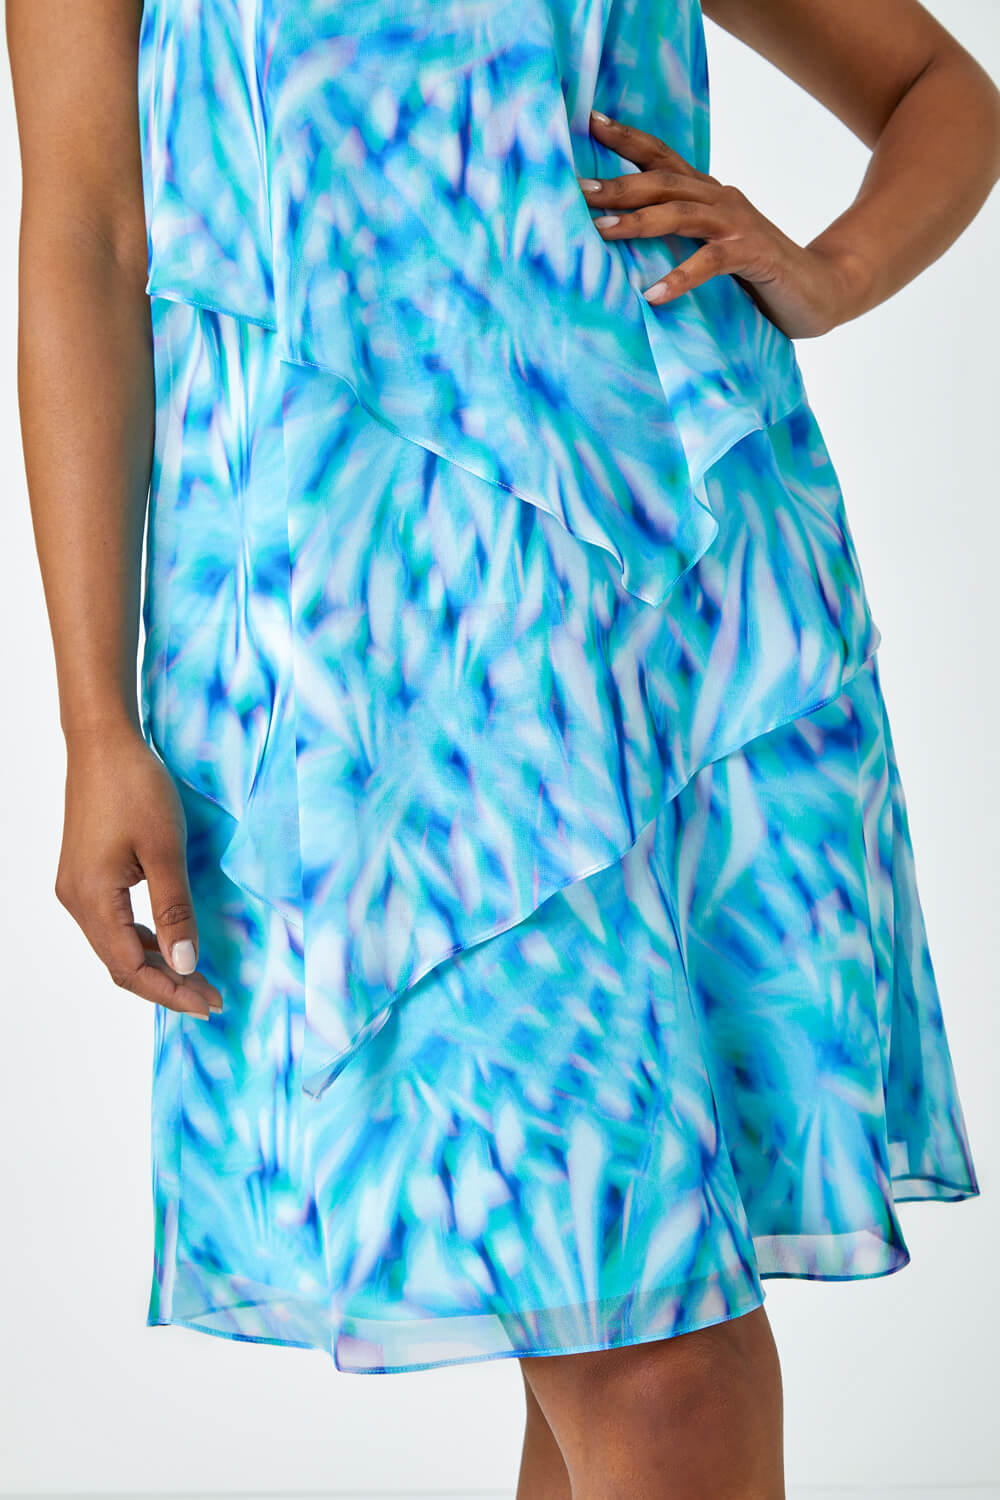 Turquoise Petite Abstract Tiered Chiffon Dress, Image 5 of 5